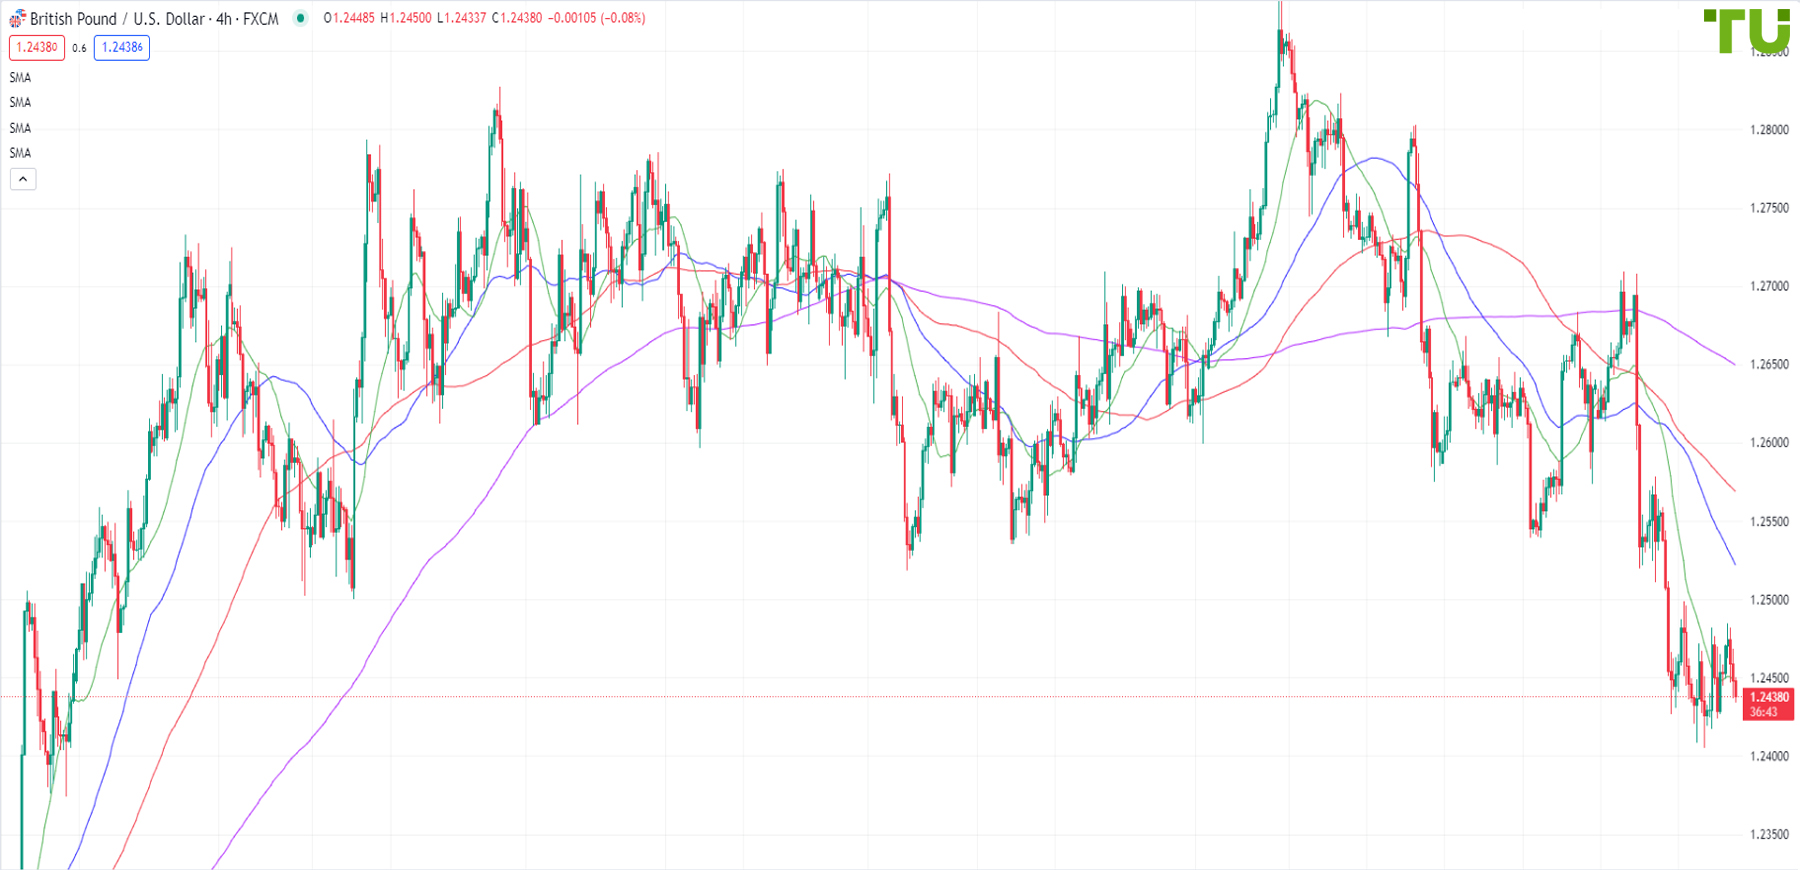 GBP/USD remains under selling pressure